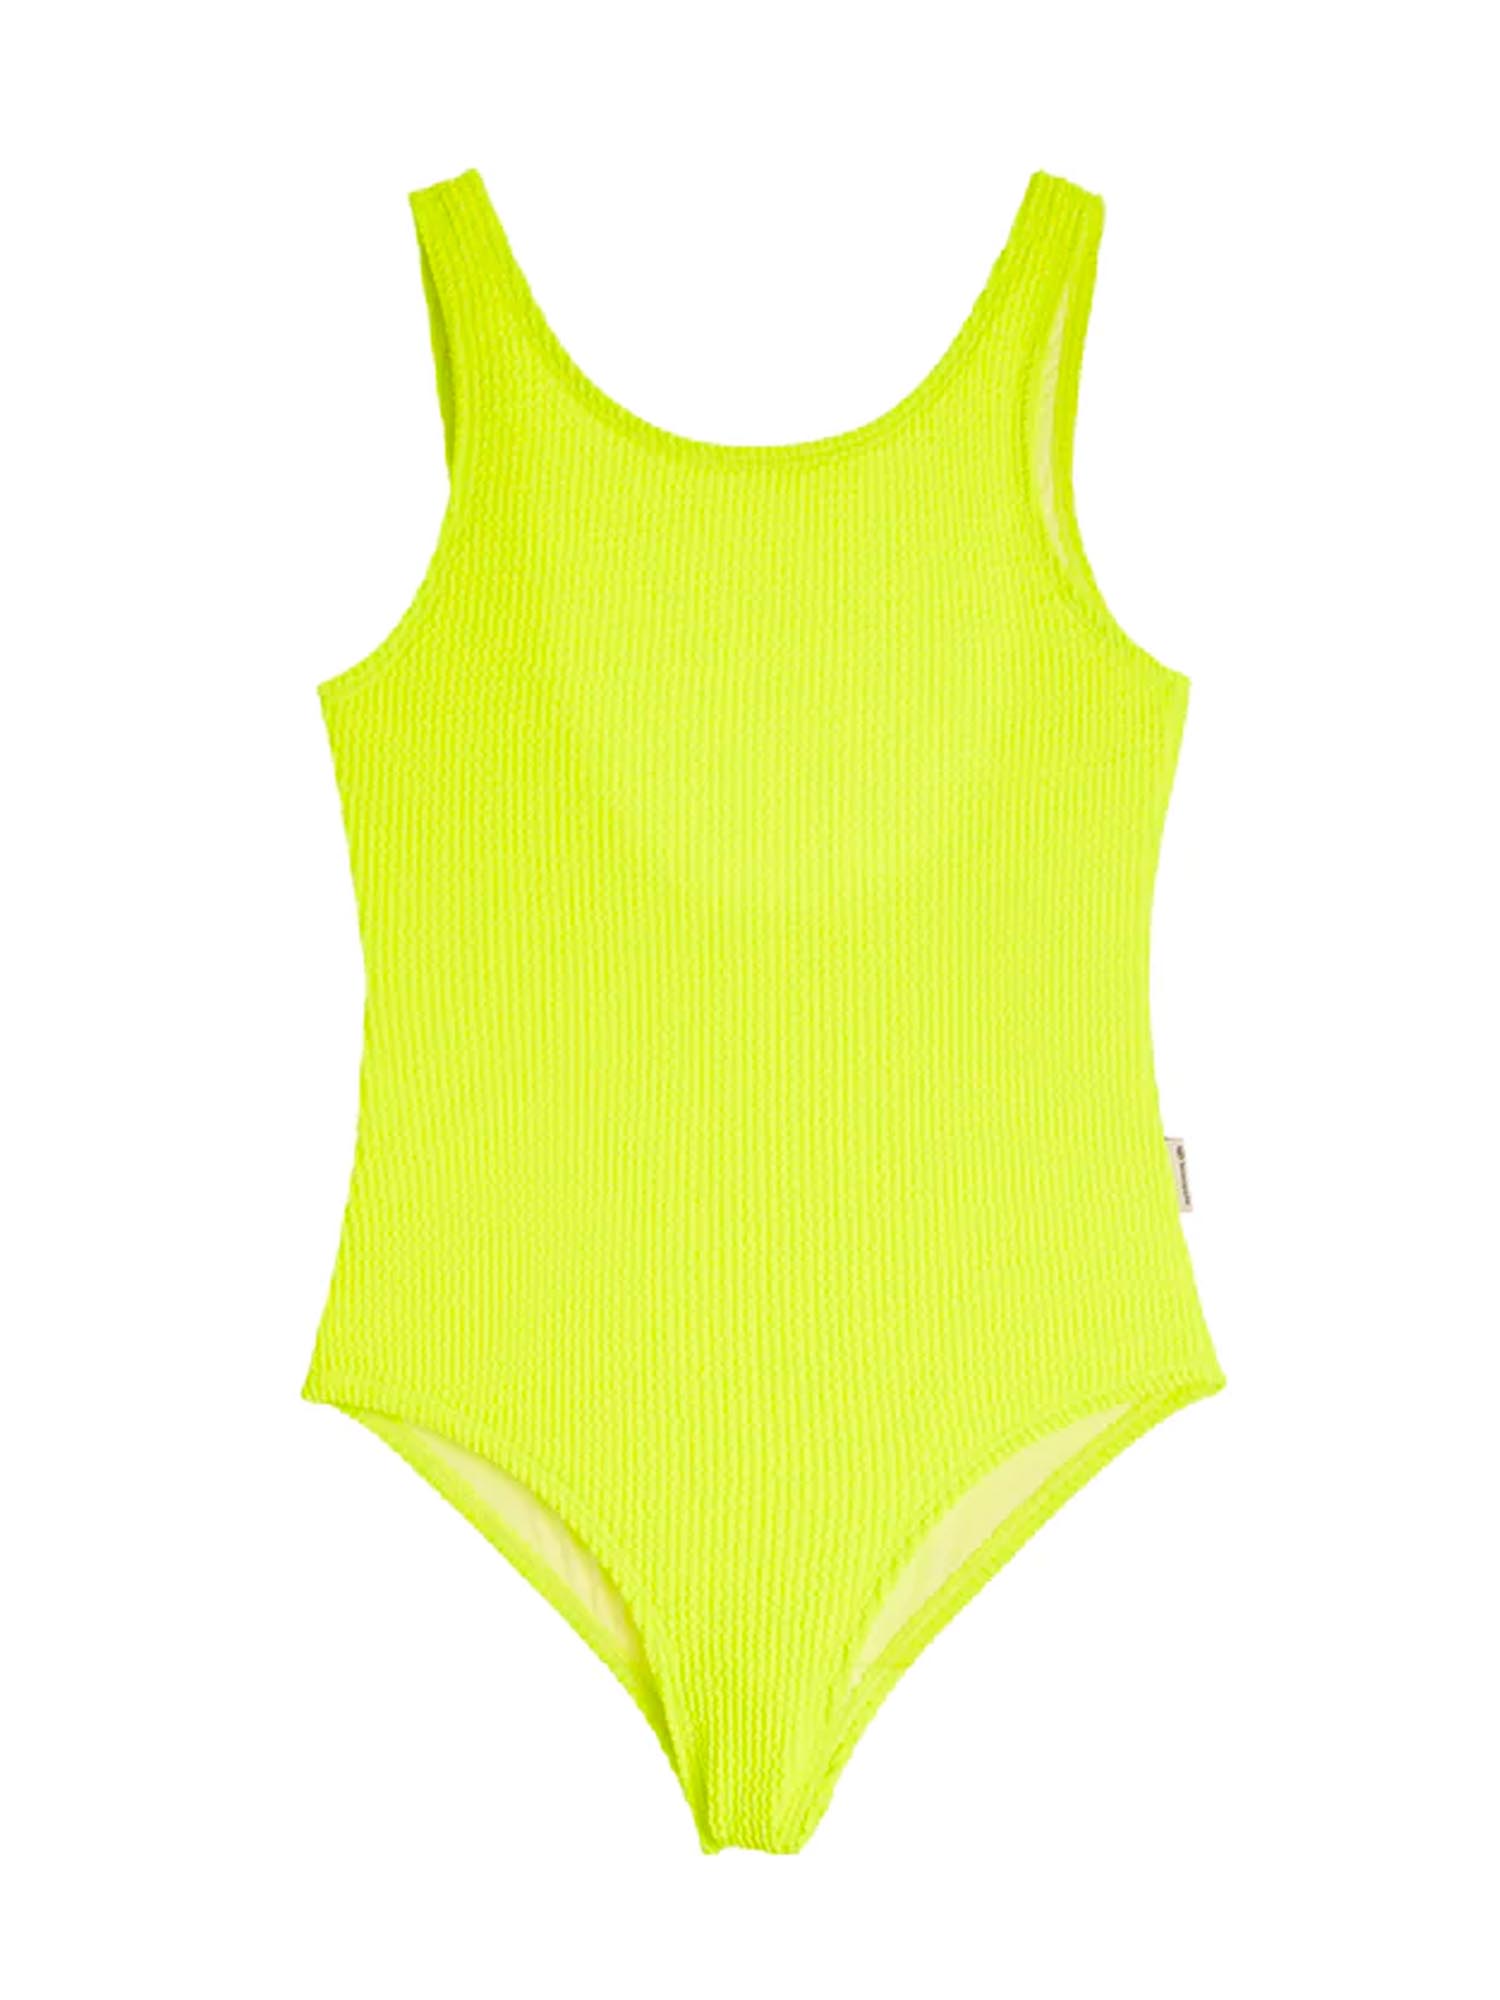 Square Neck One Piece Swimsuit with Crinkle Texture Fabric (ADDISON)